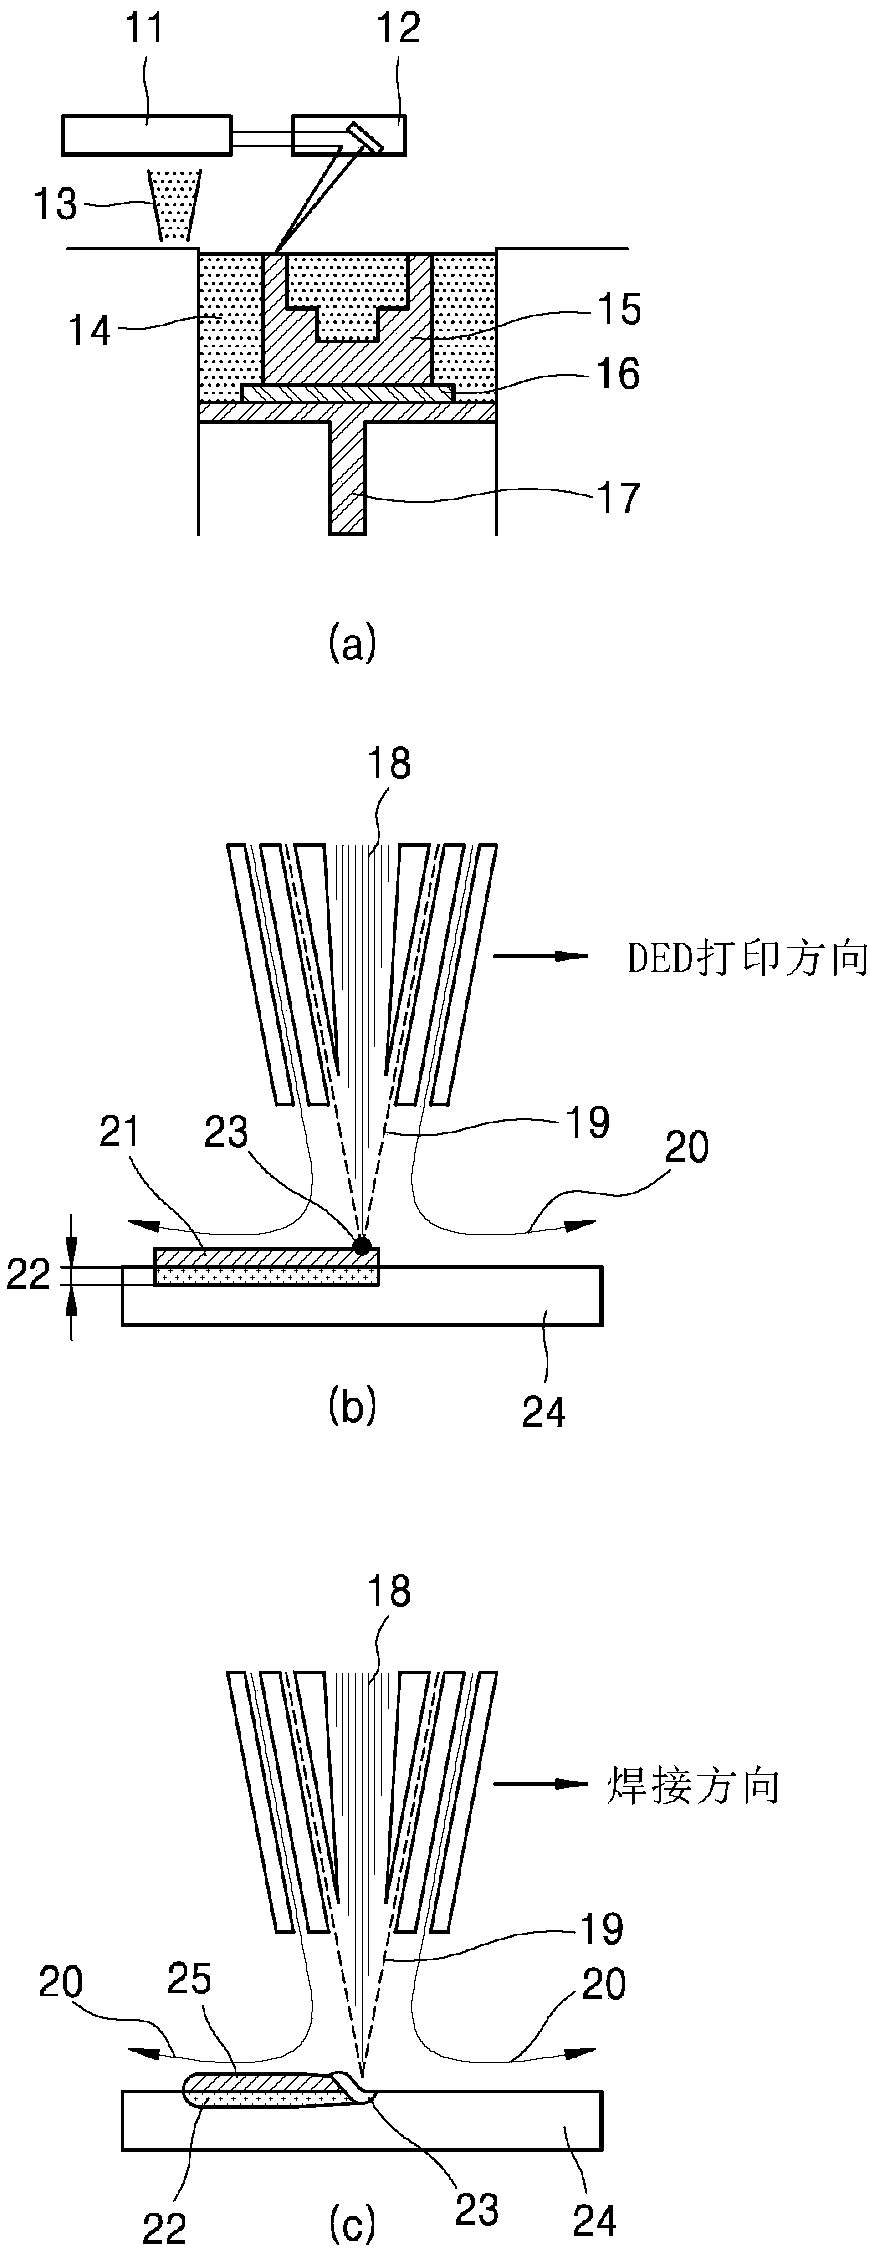 Ded arc three-dimensional alloy metal powder printing method and apparatus using arc and alloy metal powder core wire